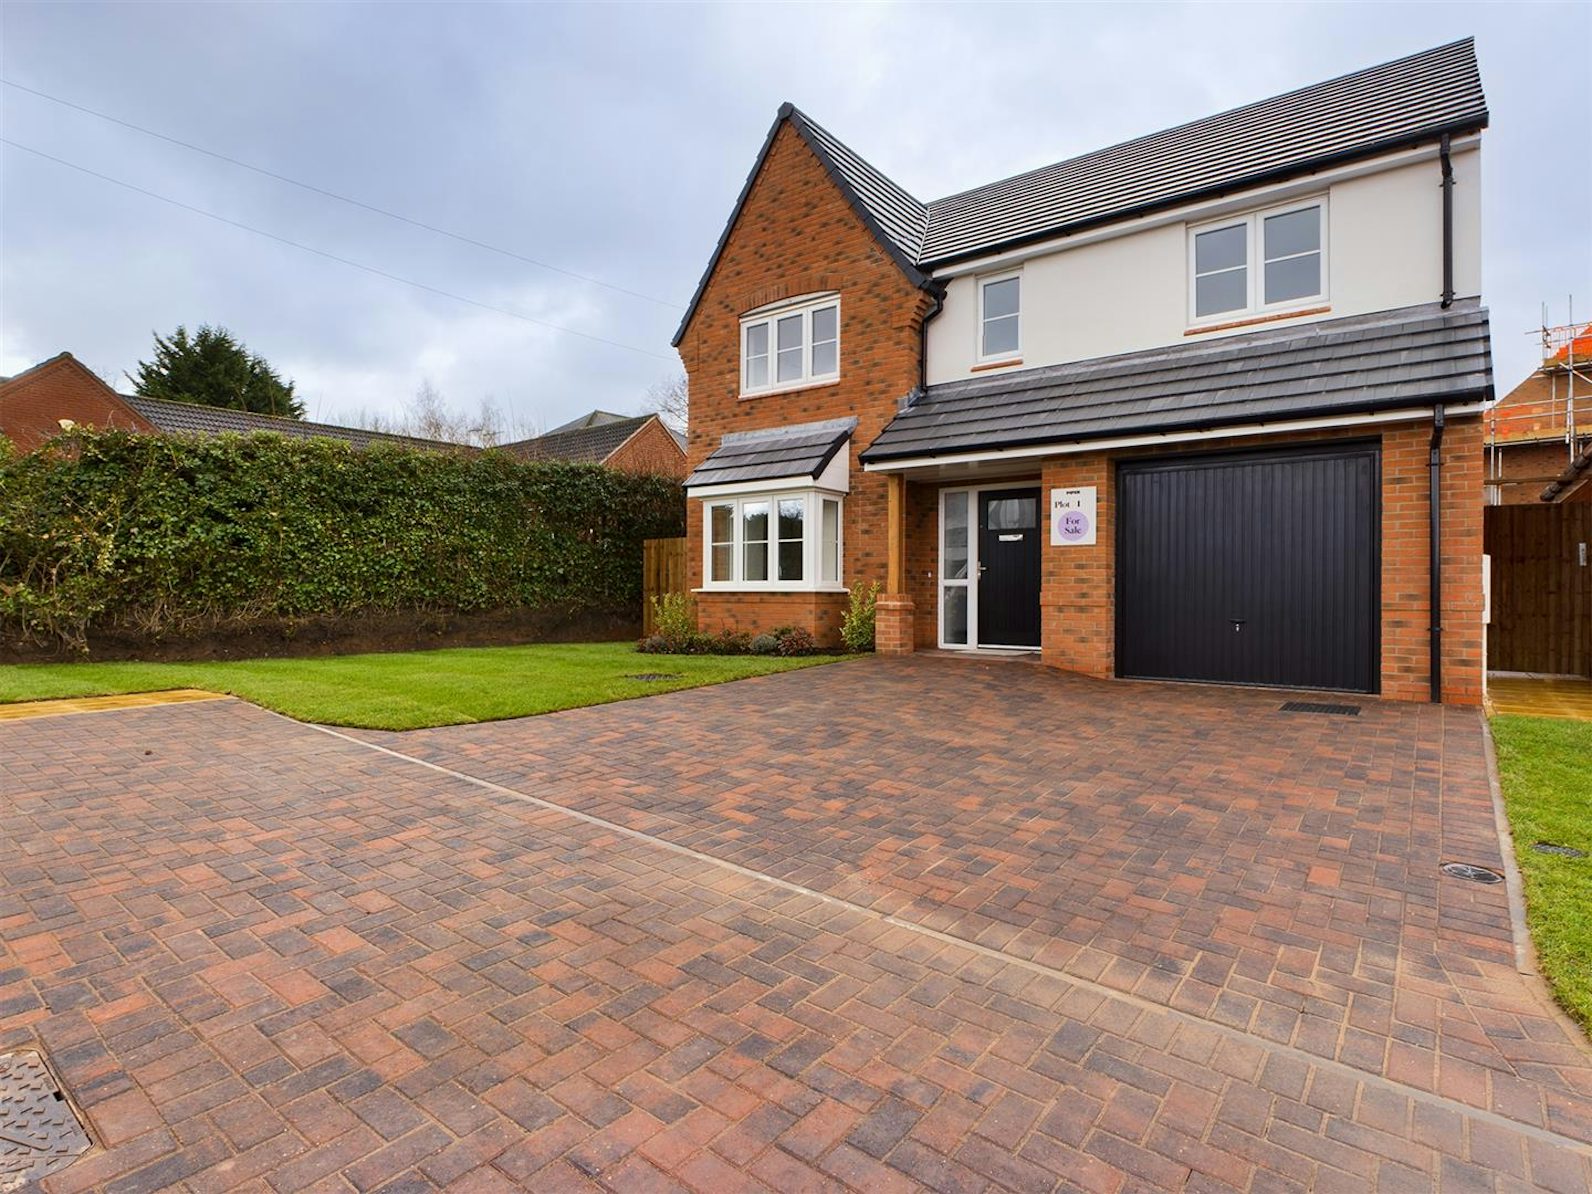 Detached house for sale on High Oakham Ridge Mansfield, NG18